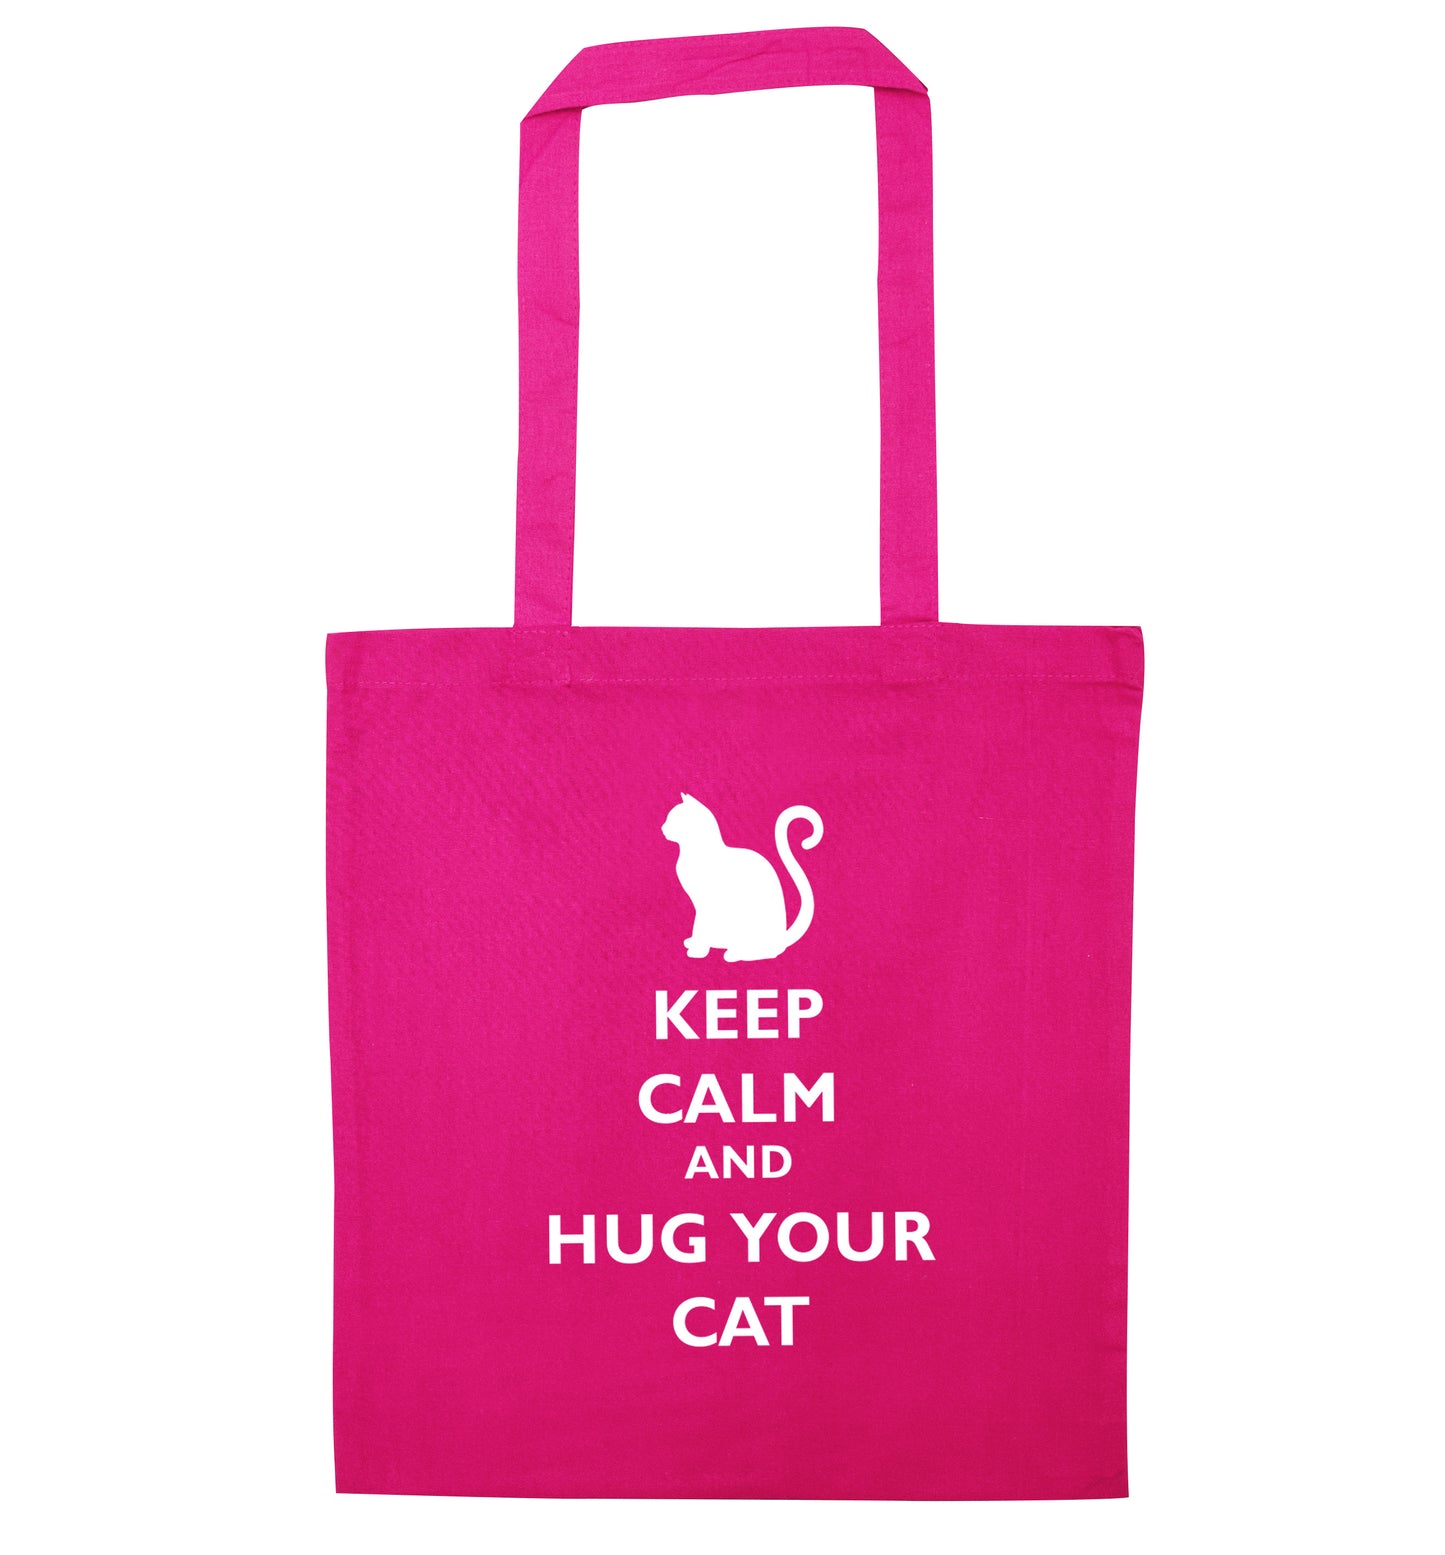 Keep calm and hug your cat pink tote bag